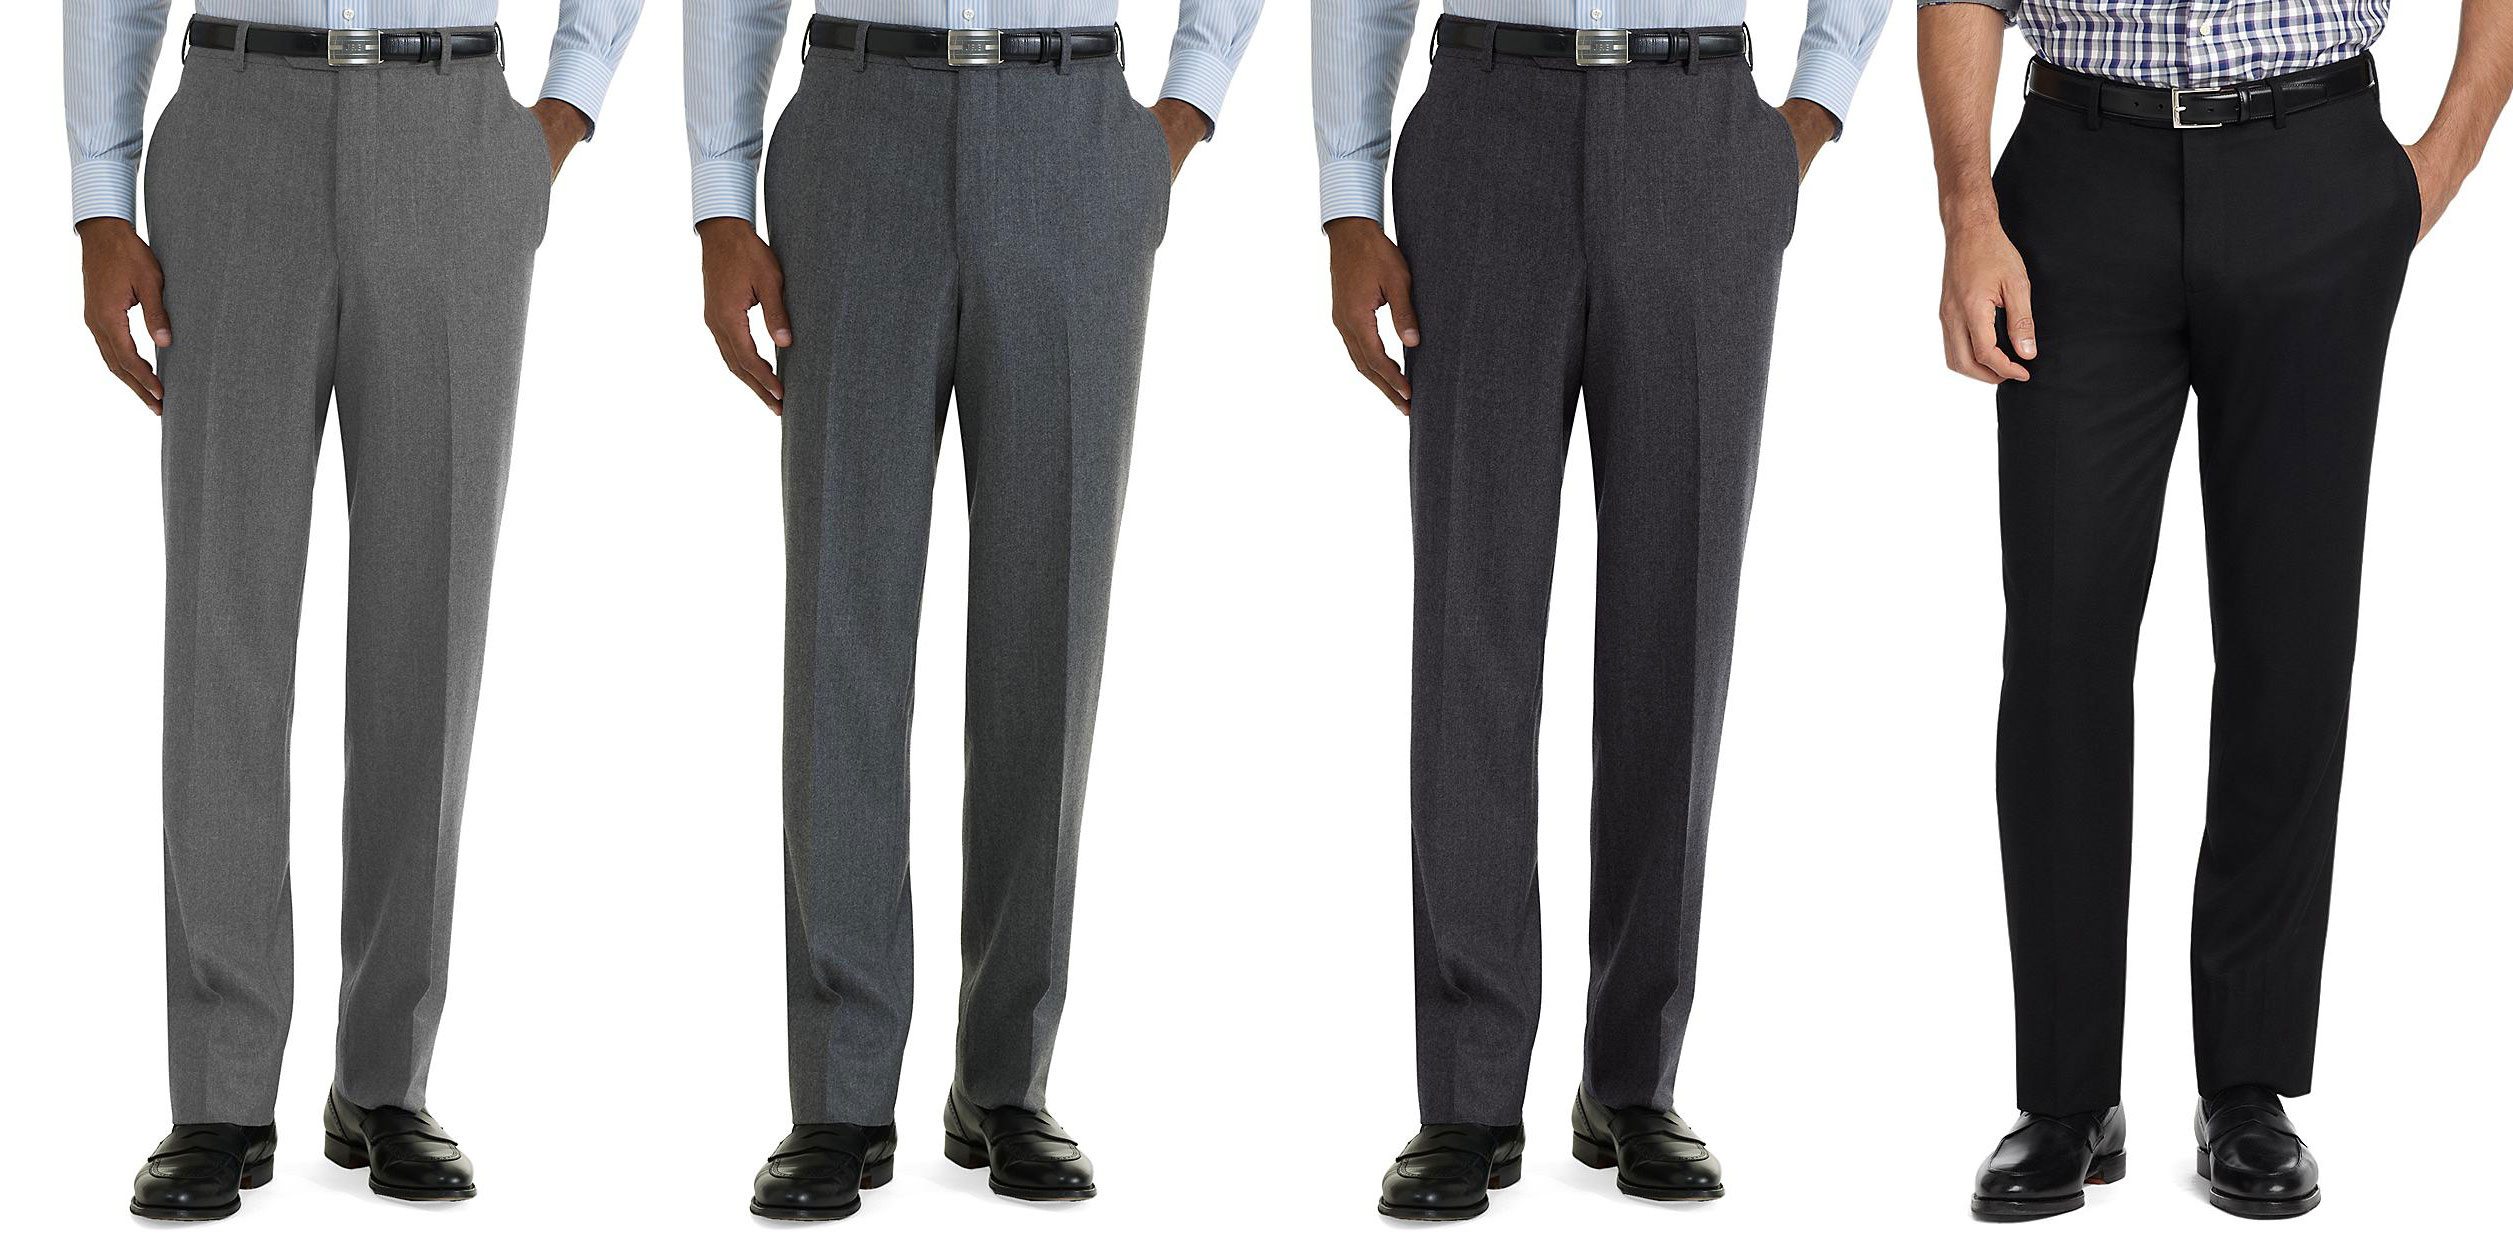 Barberis Tailored Fit Light Grey Flannel Trousers  Compare  The Oracle  Reading